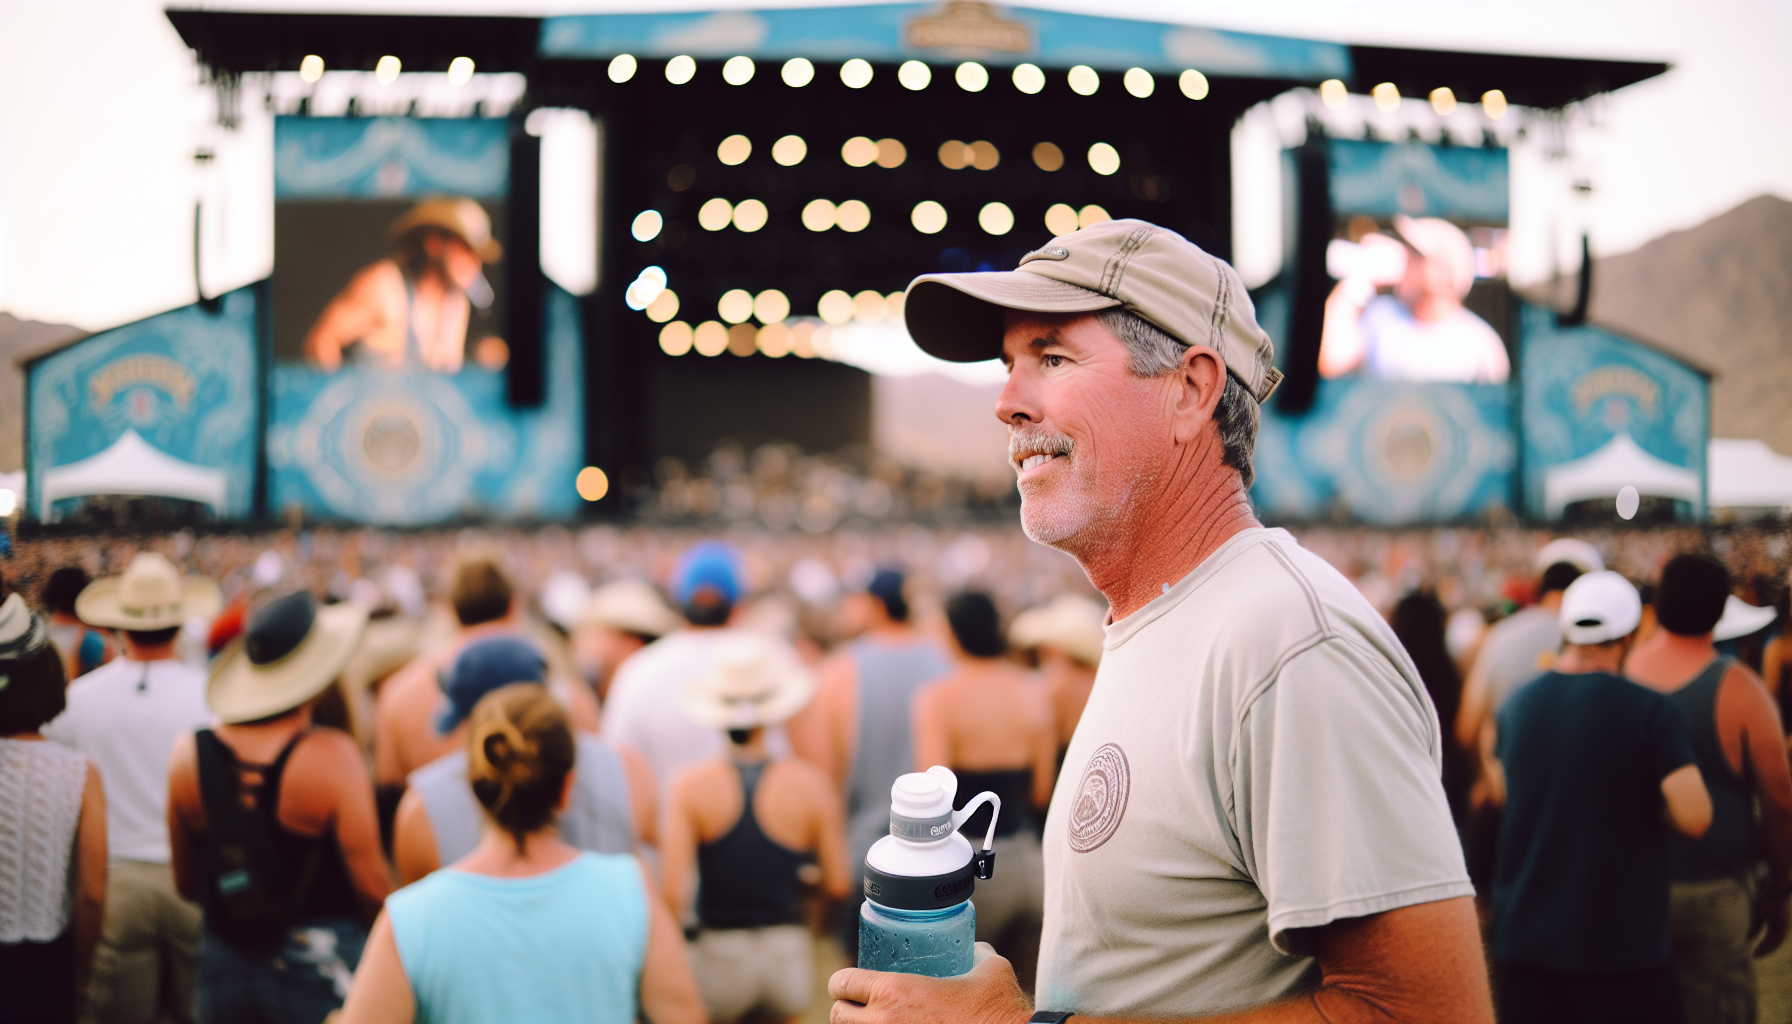 Camelback water bottle at Stagecoach Festival